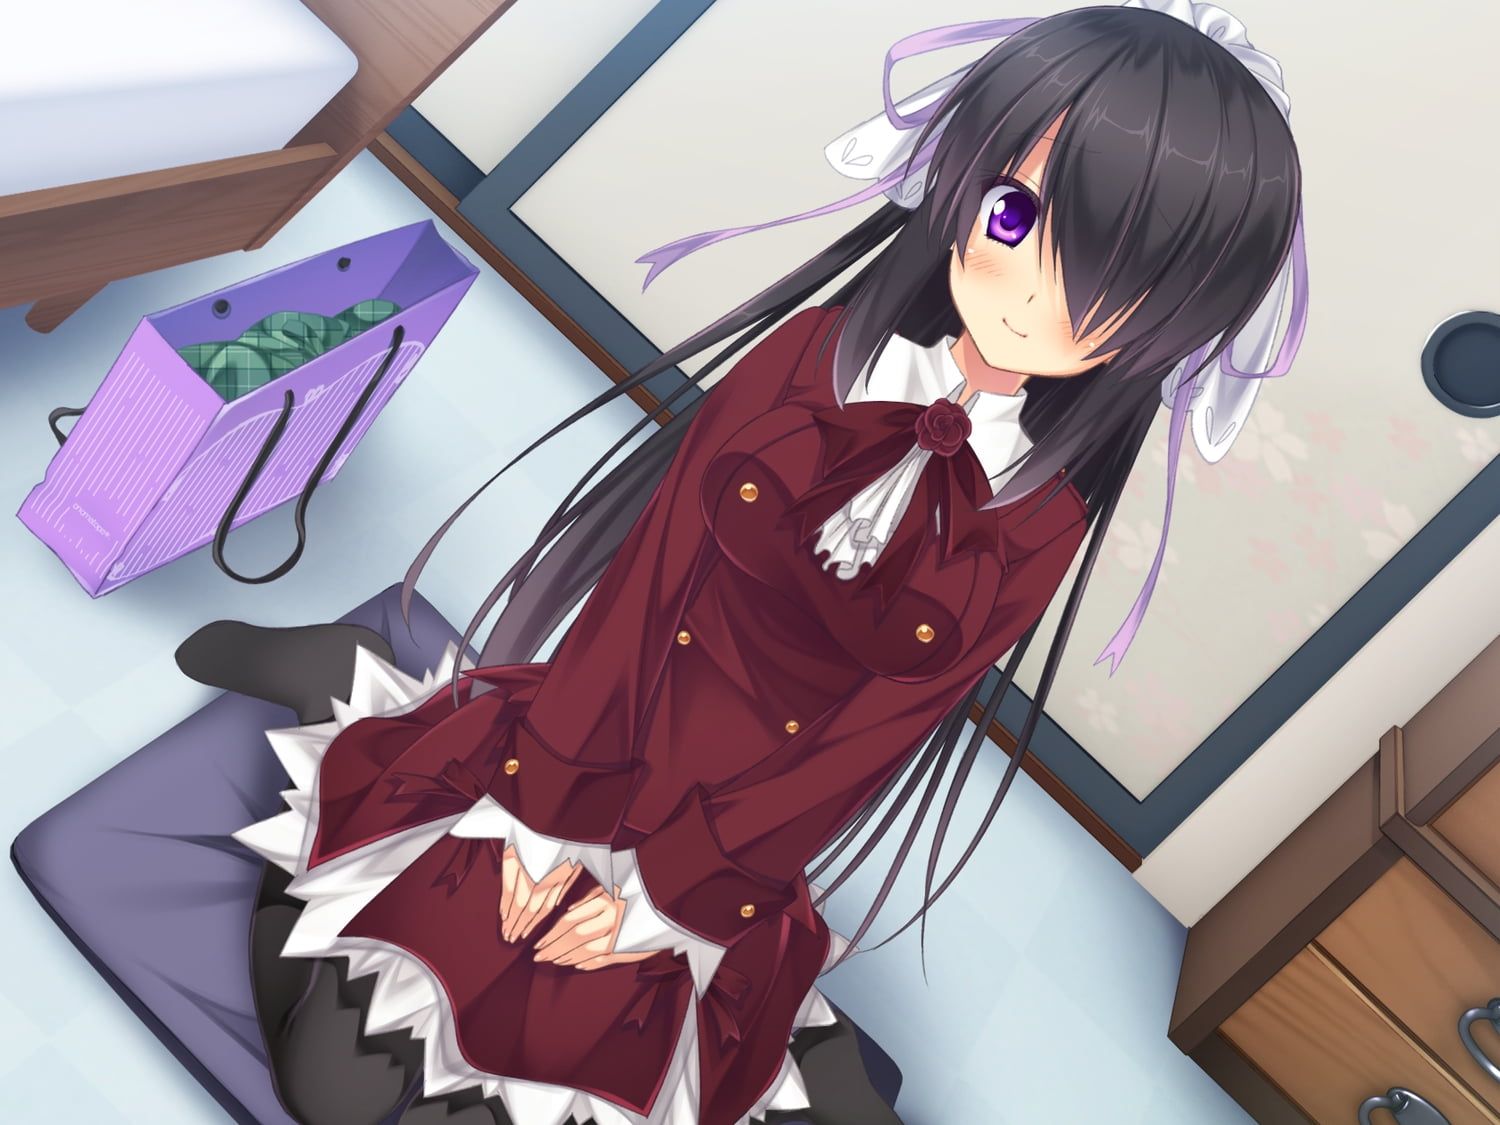 Black haired red dressed anime girl character sitting inside house